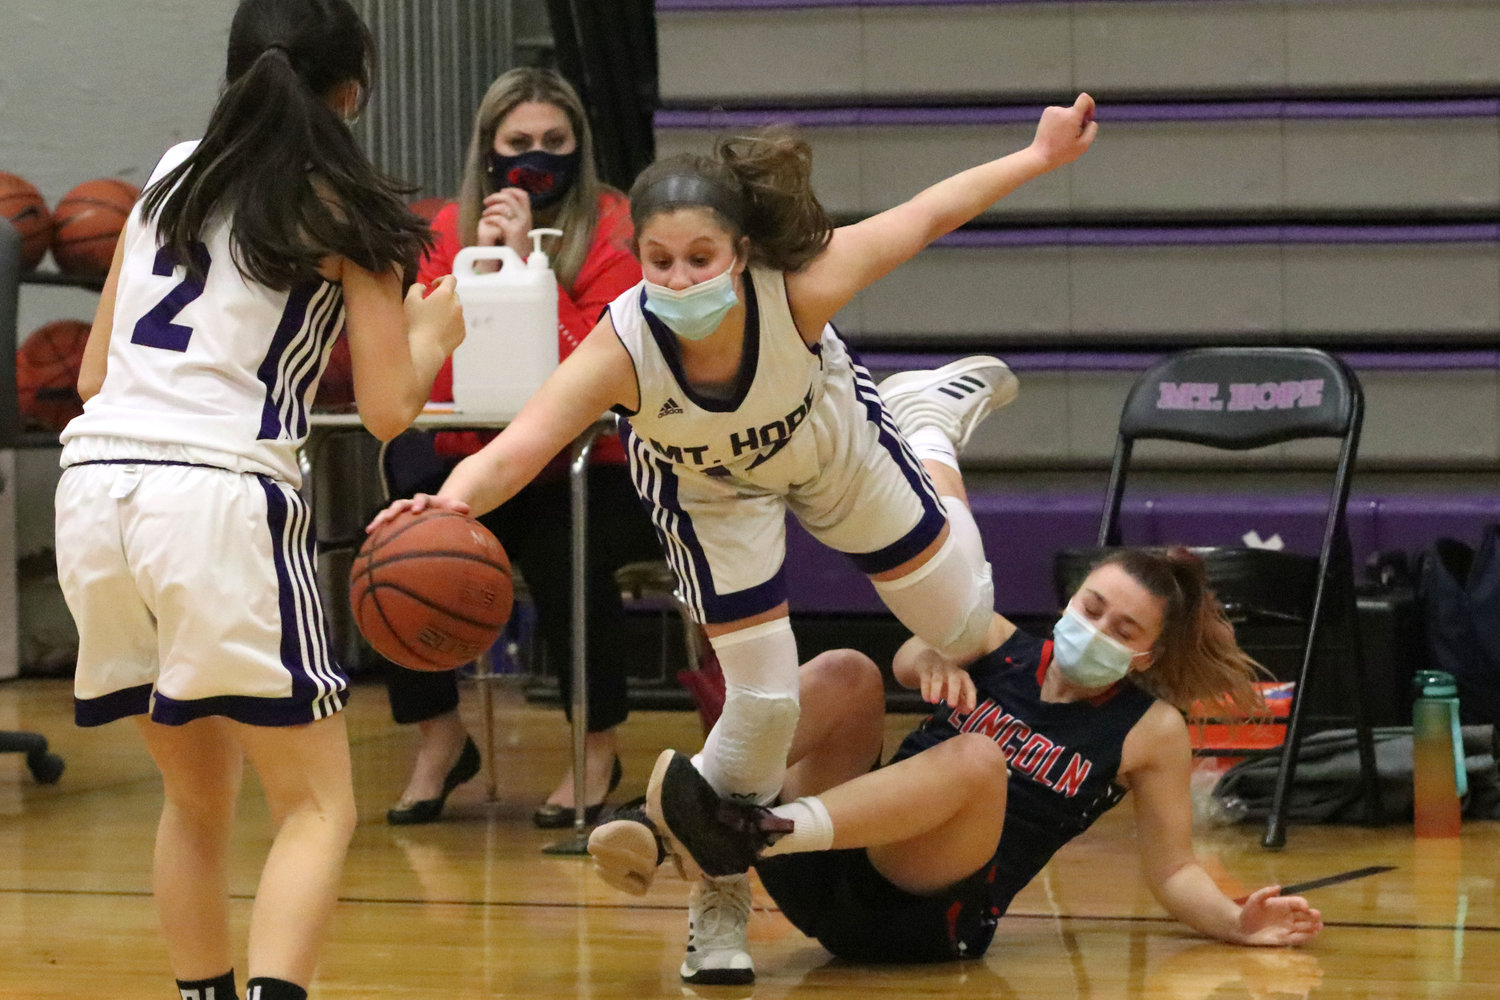 Sophomore point guard Abby Razzino steps over a Lincoln player after stealing the ball along the sidelines in the second quarter.